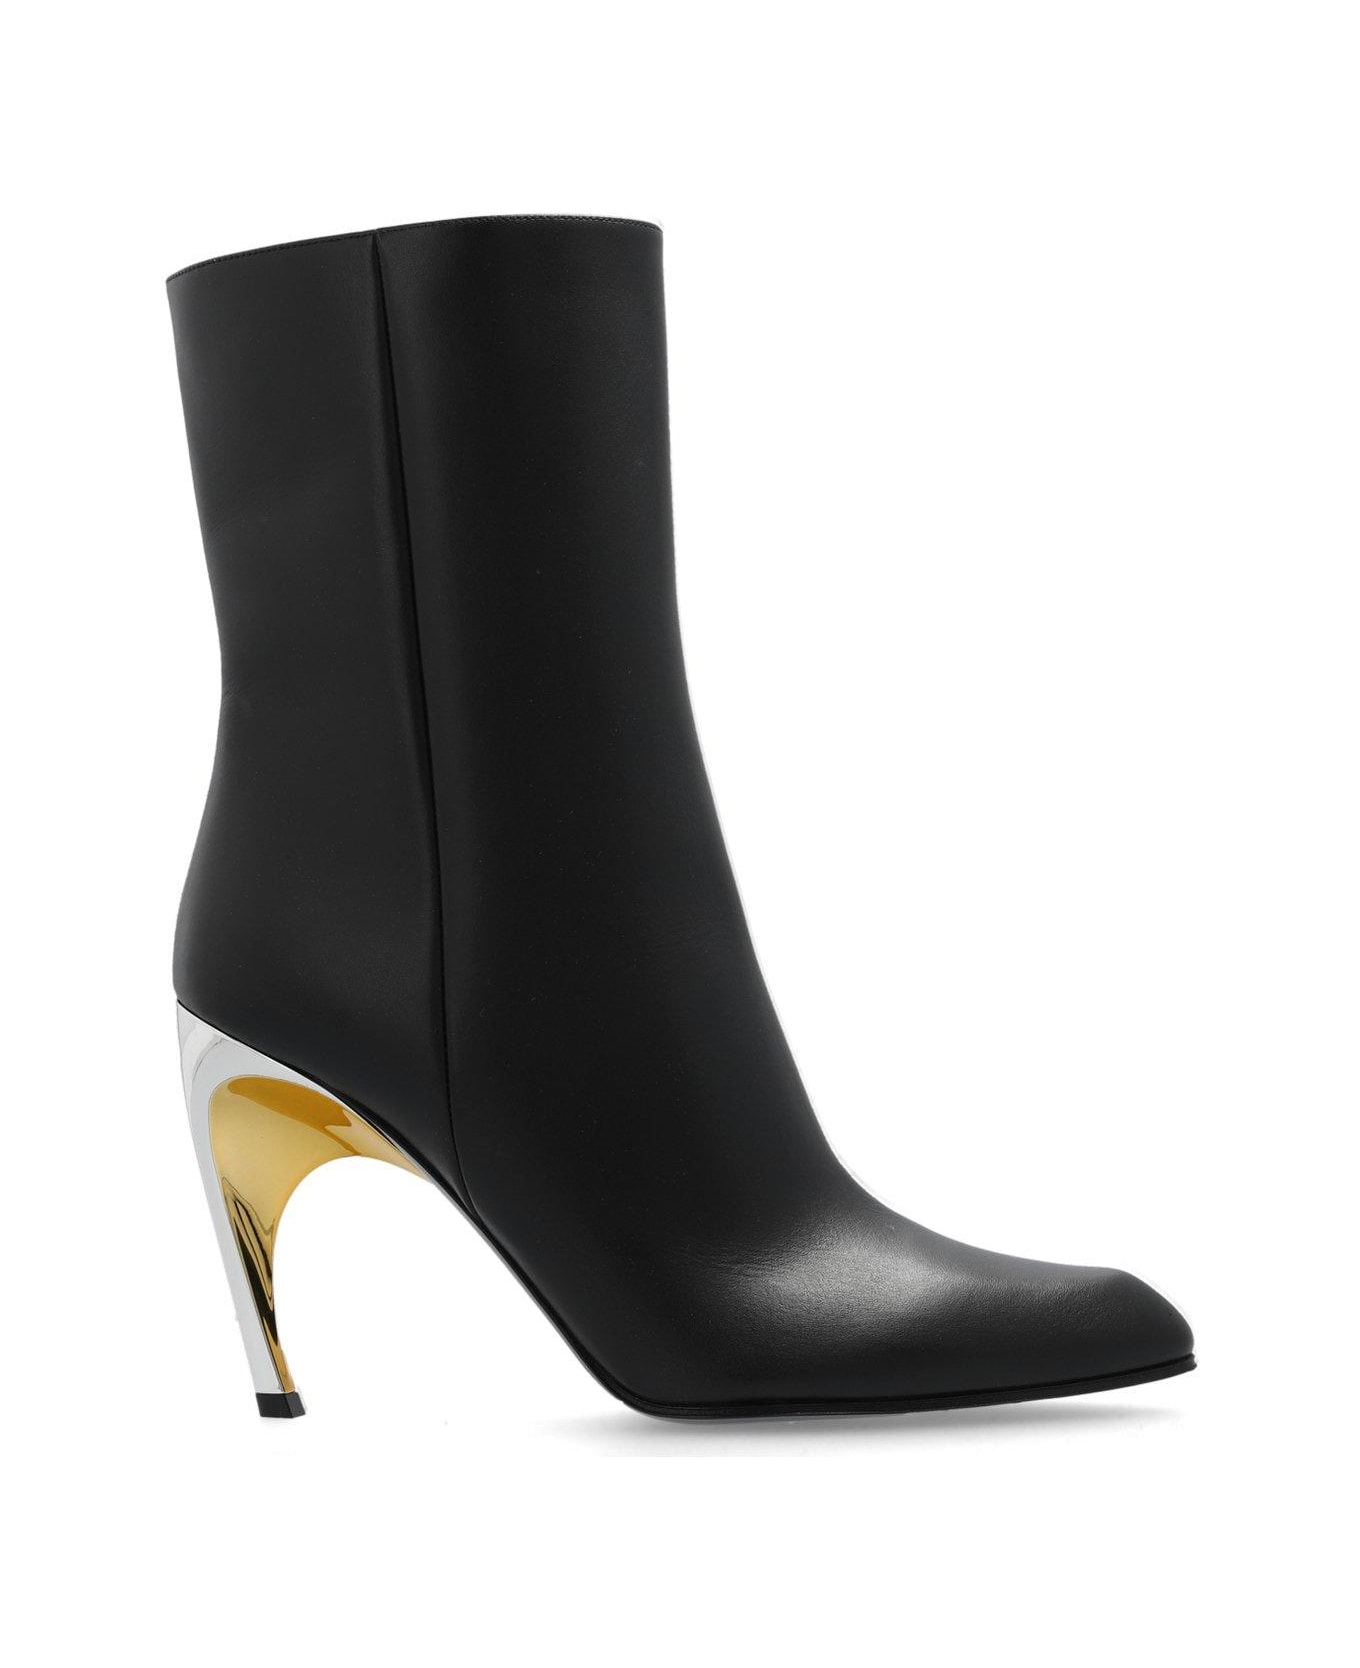 Alexander McQueen Pointed Toe Heeled Boots - Black/silver/gold